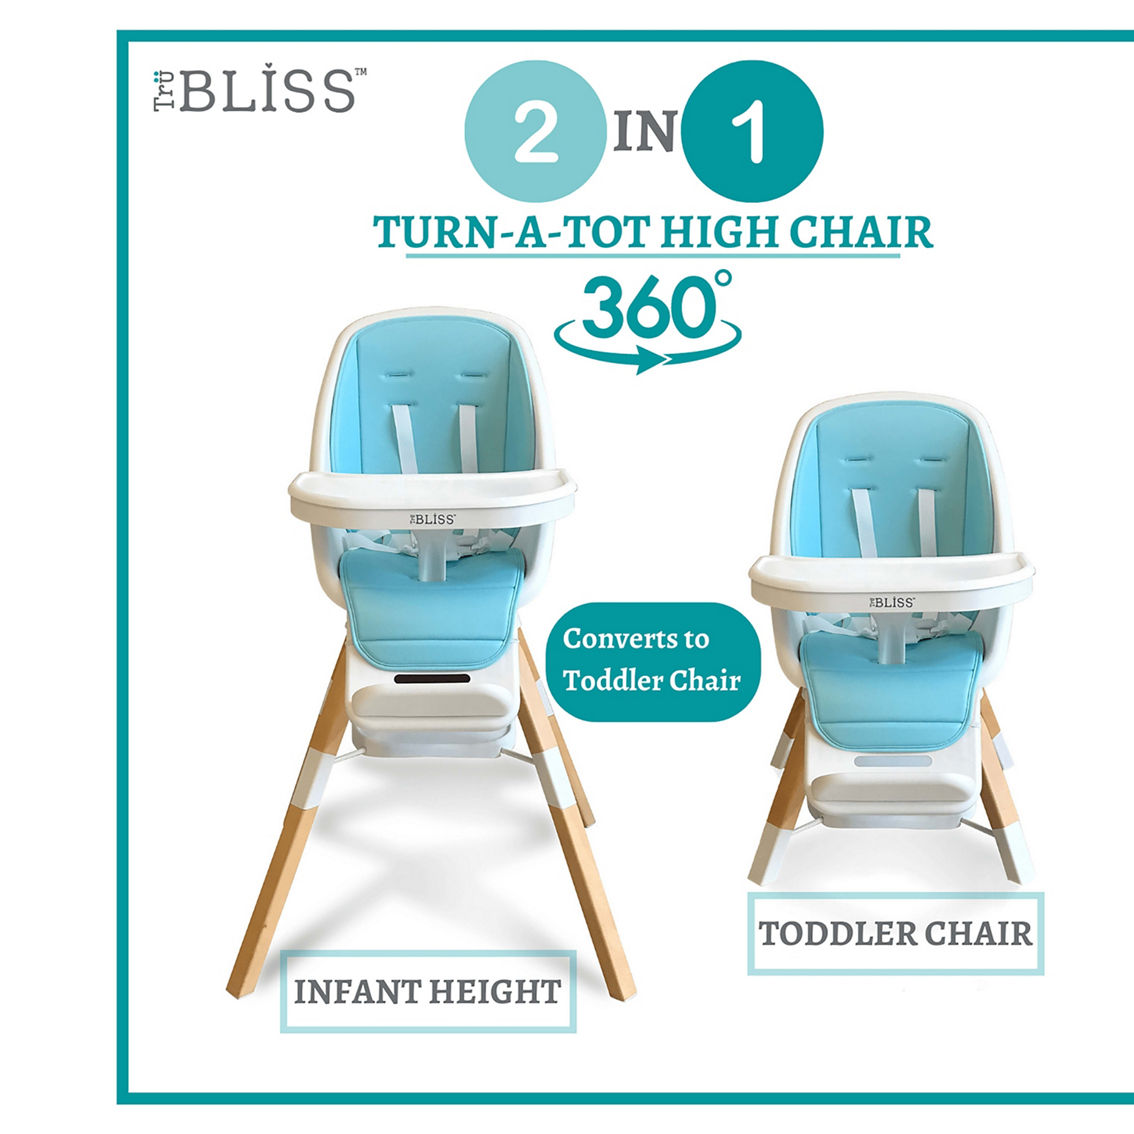 2in1 Turn-A-Tot High Chair - Image 3 of 5